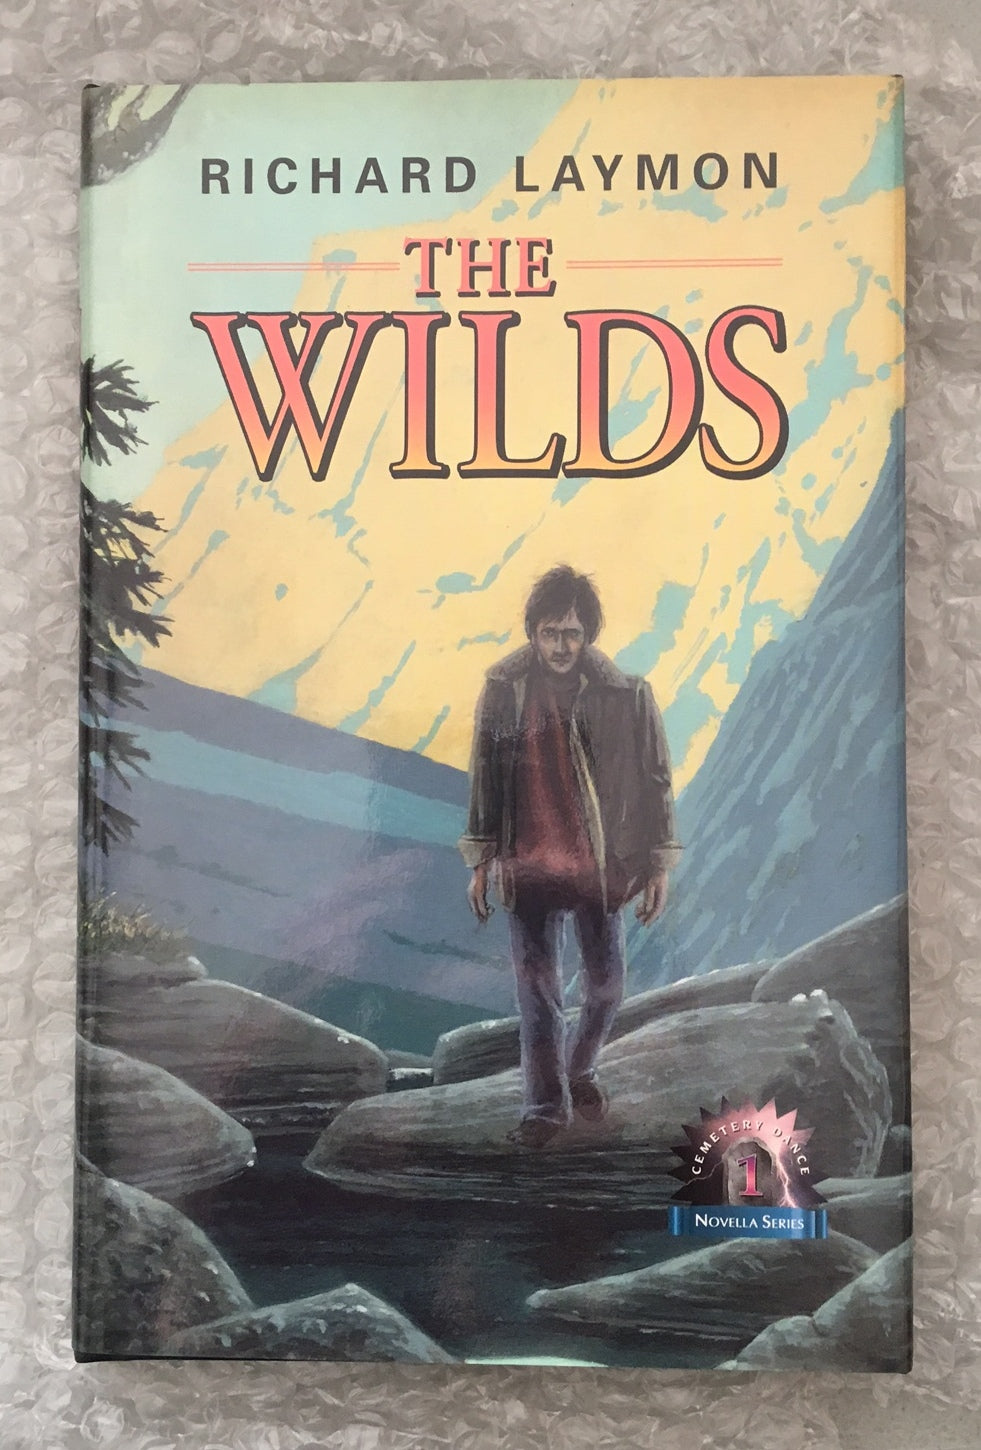 The Wilds by Richard Laymon Signed Numbered Hardcover RARE